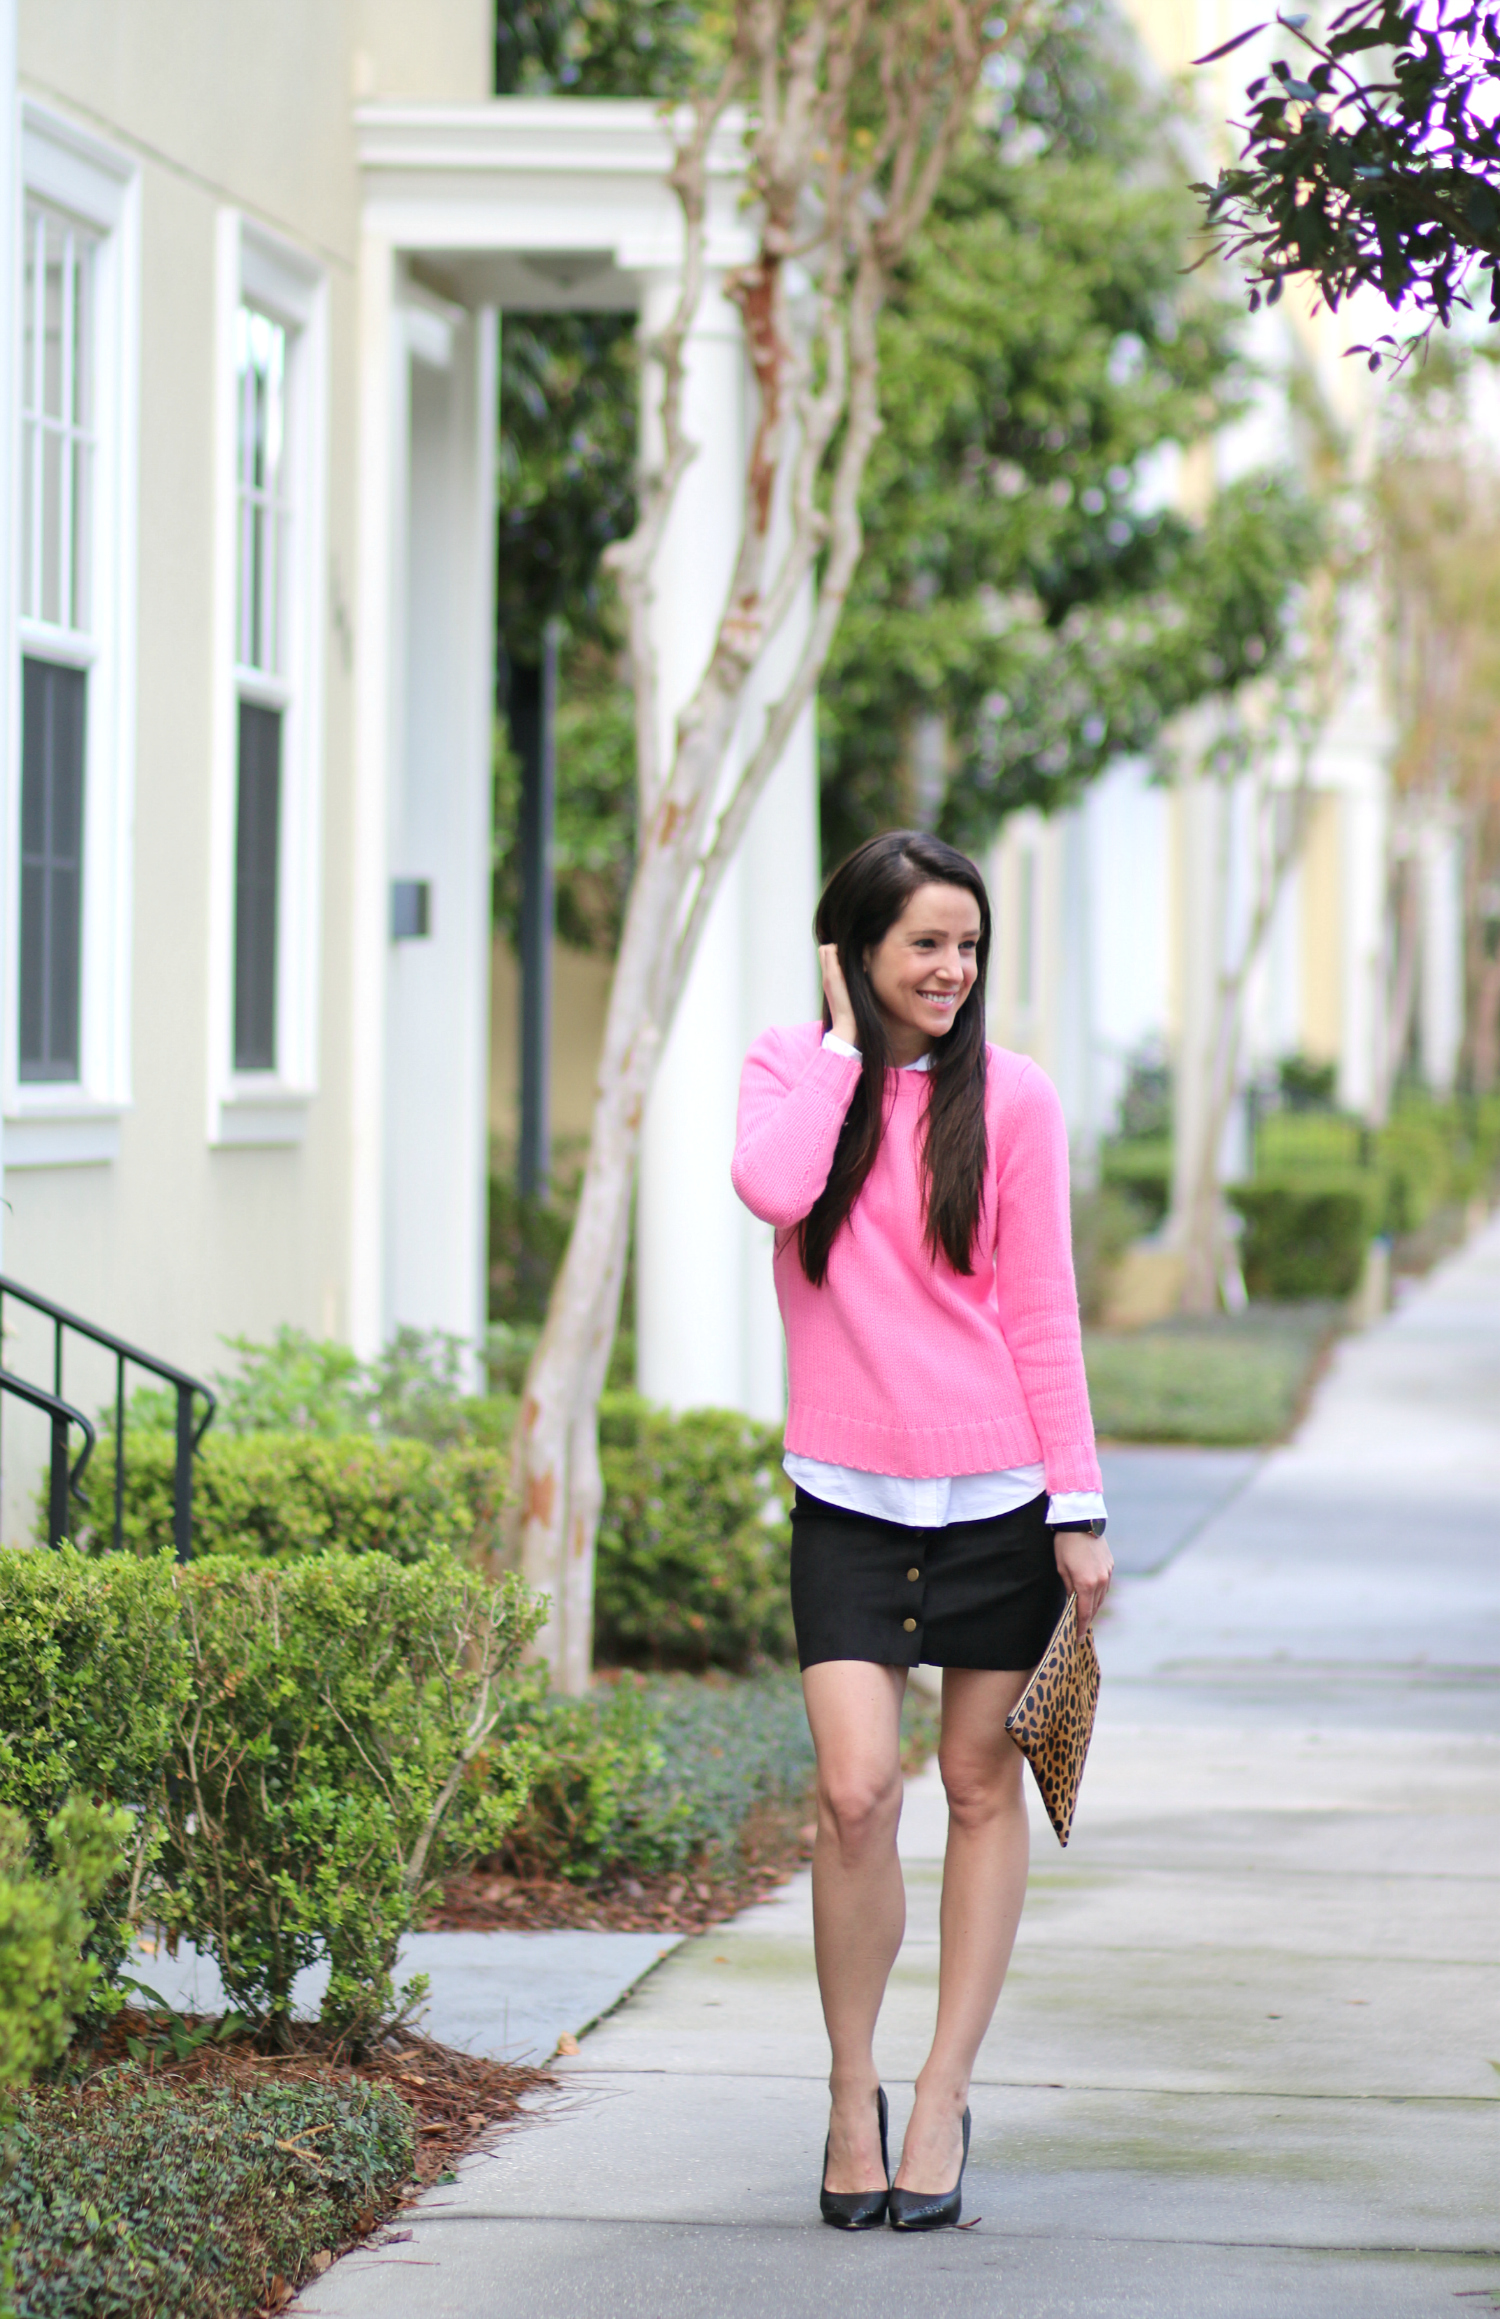 A preppy, dressy casual pink crewneck sweater outfit from J.Crew Factory and SheIn